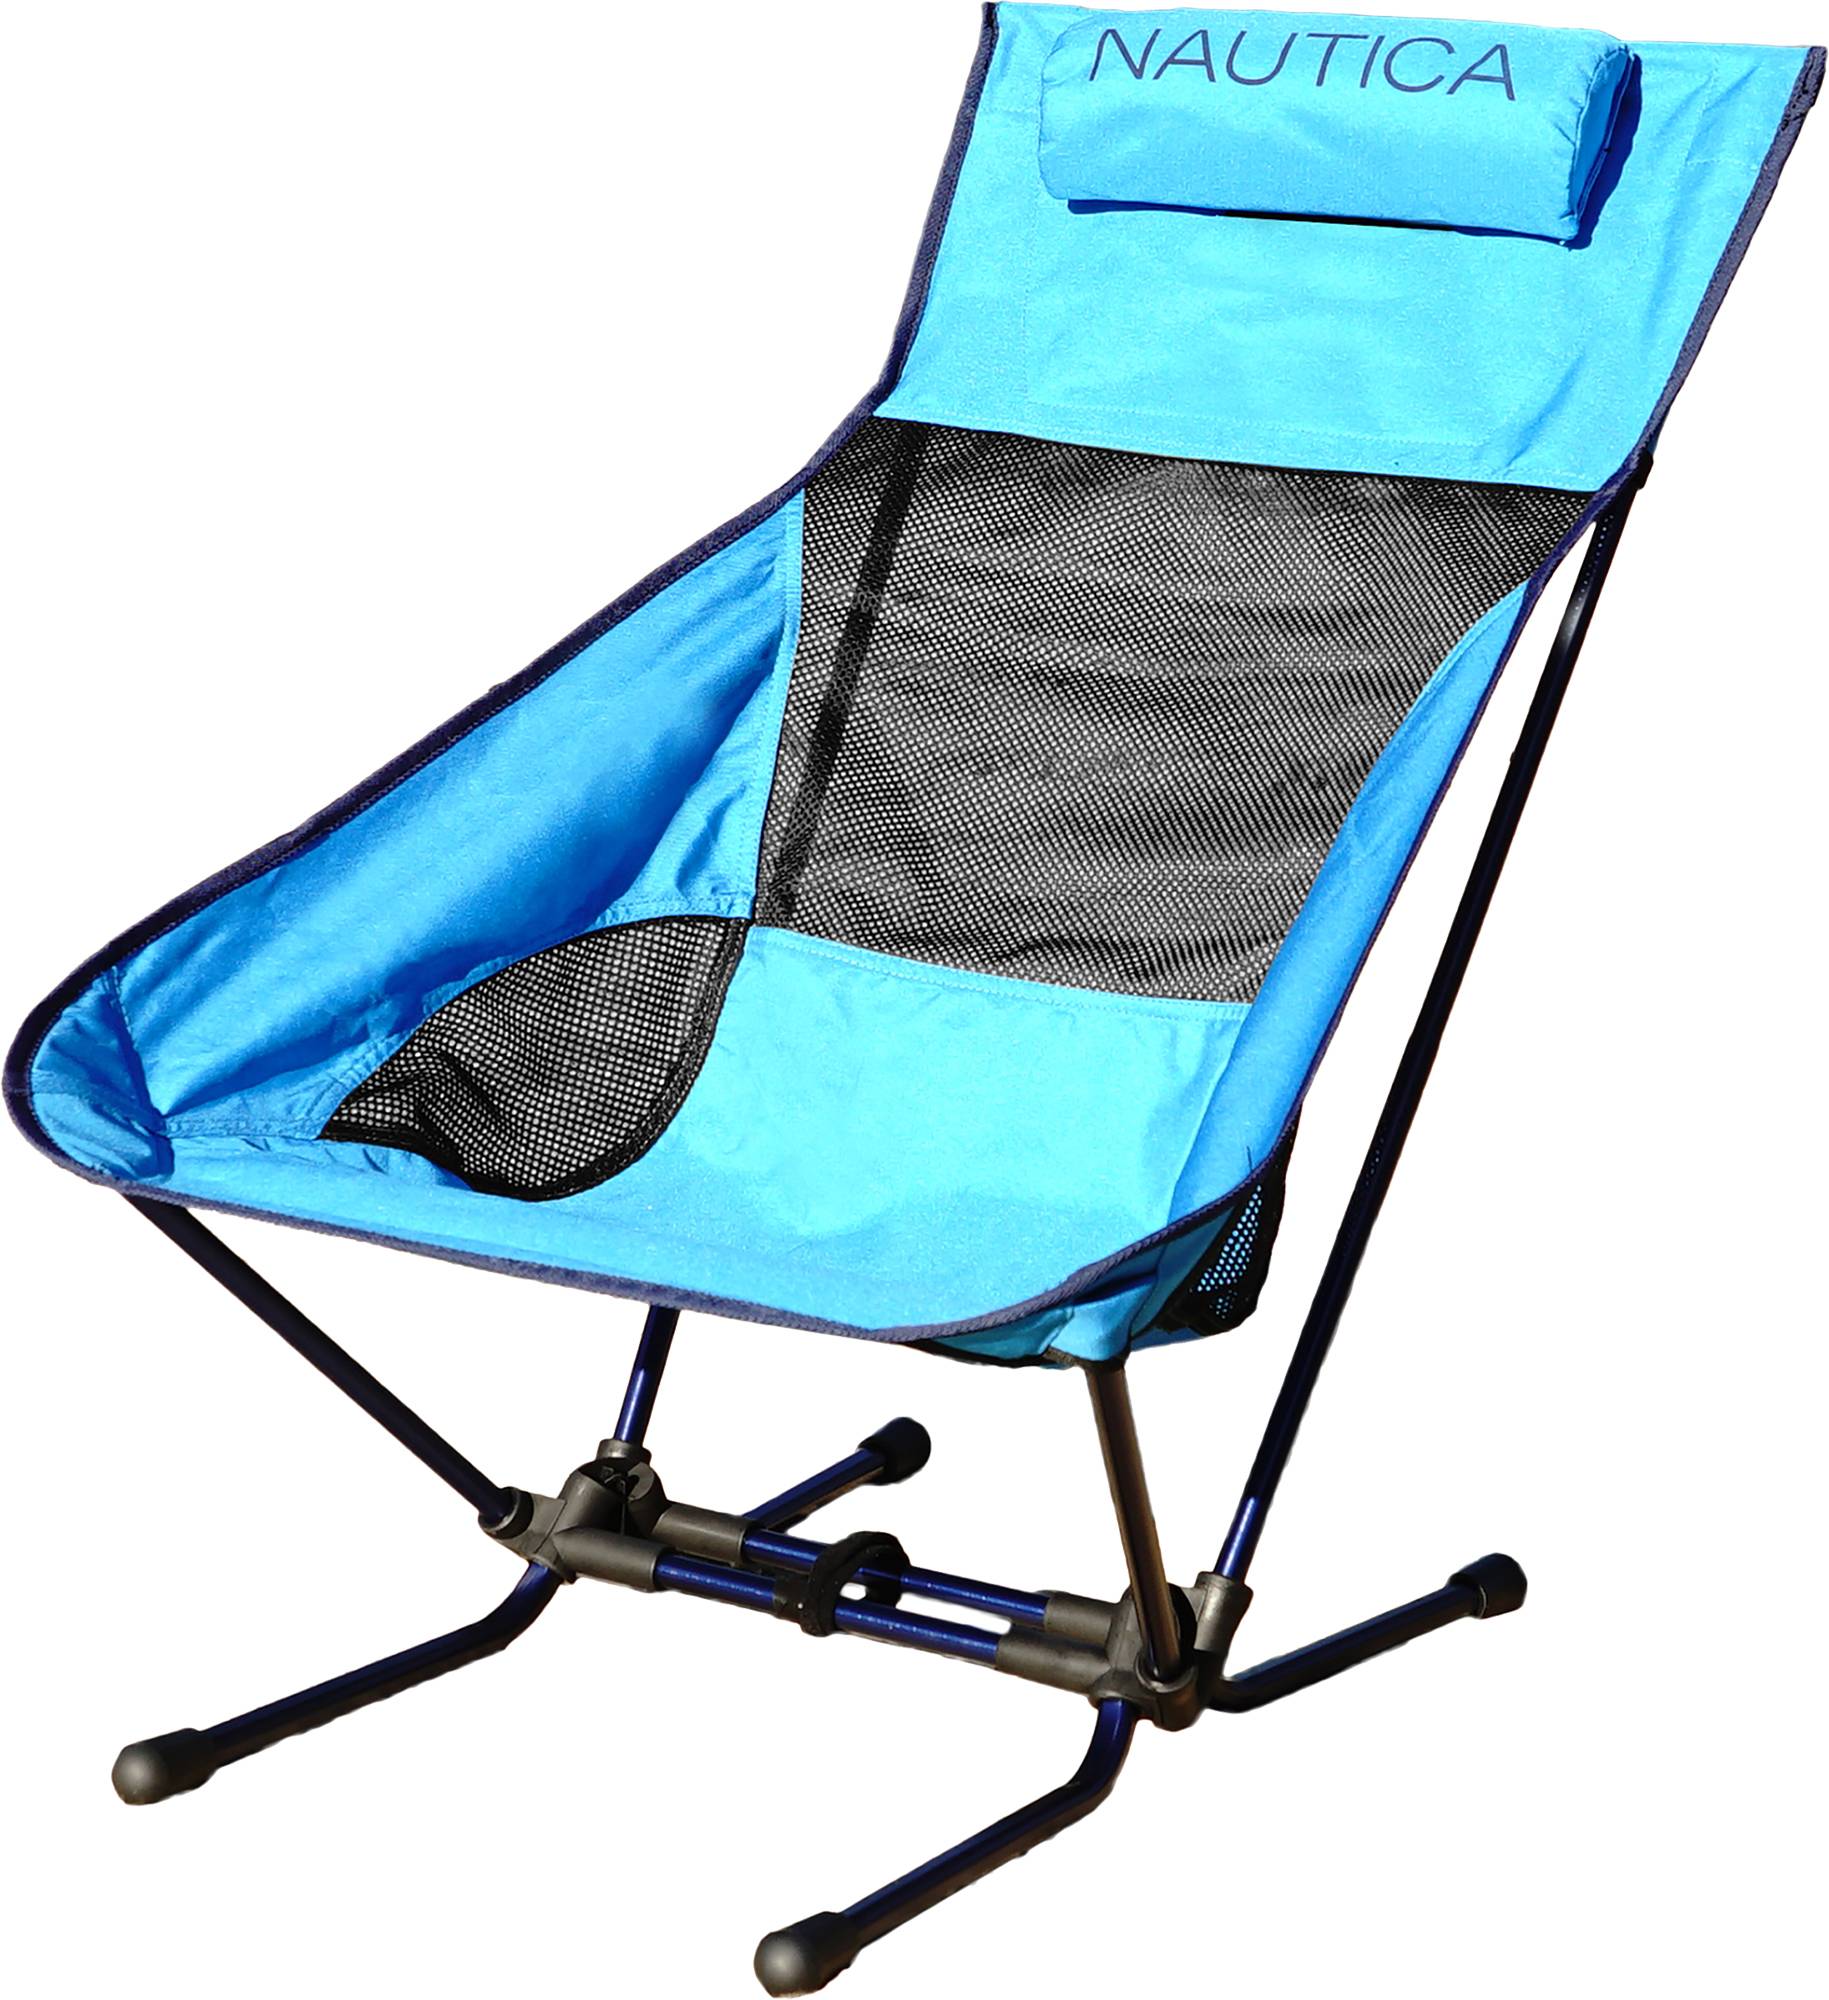 Minimalist Nautica Beach Chair Blue Ombre for Large Space